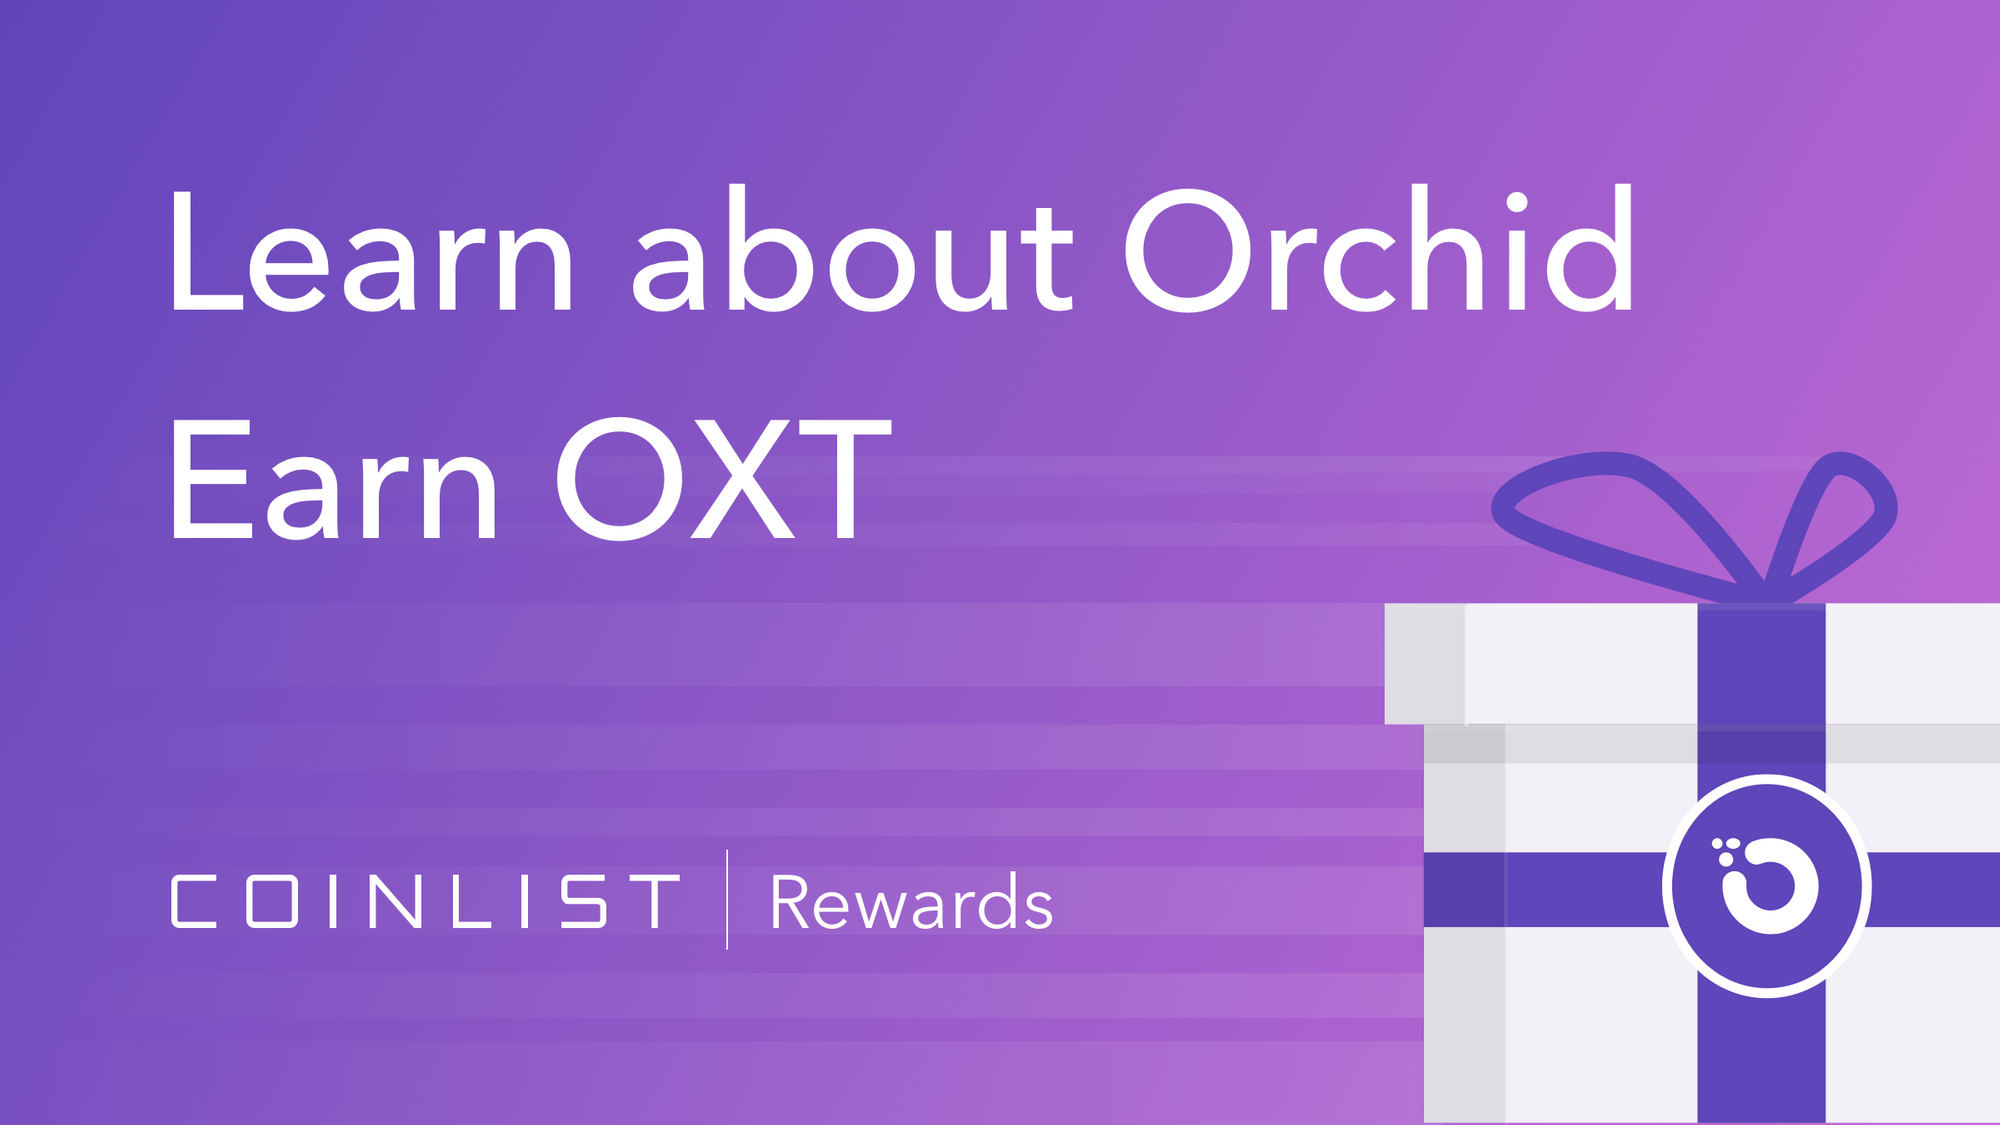 Introducing CoinList Rewards: Learn about Orchid, Earn OXT